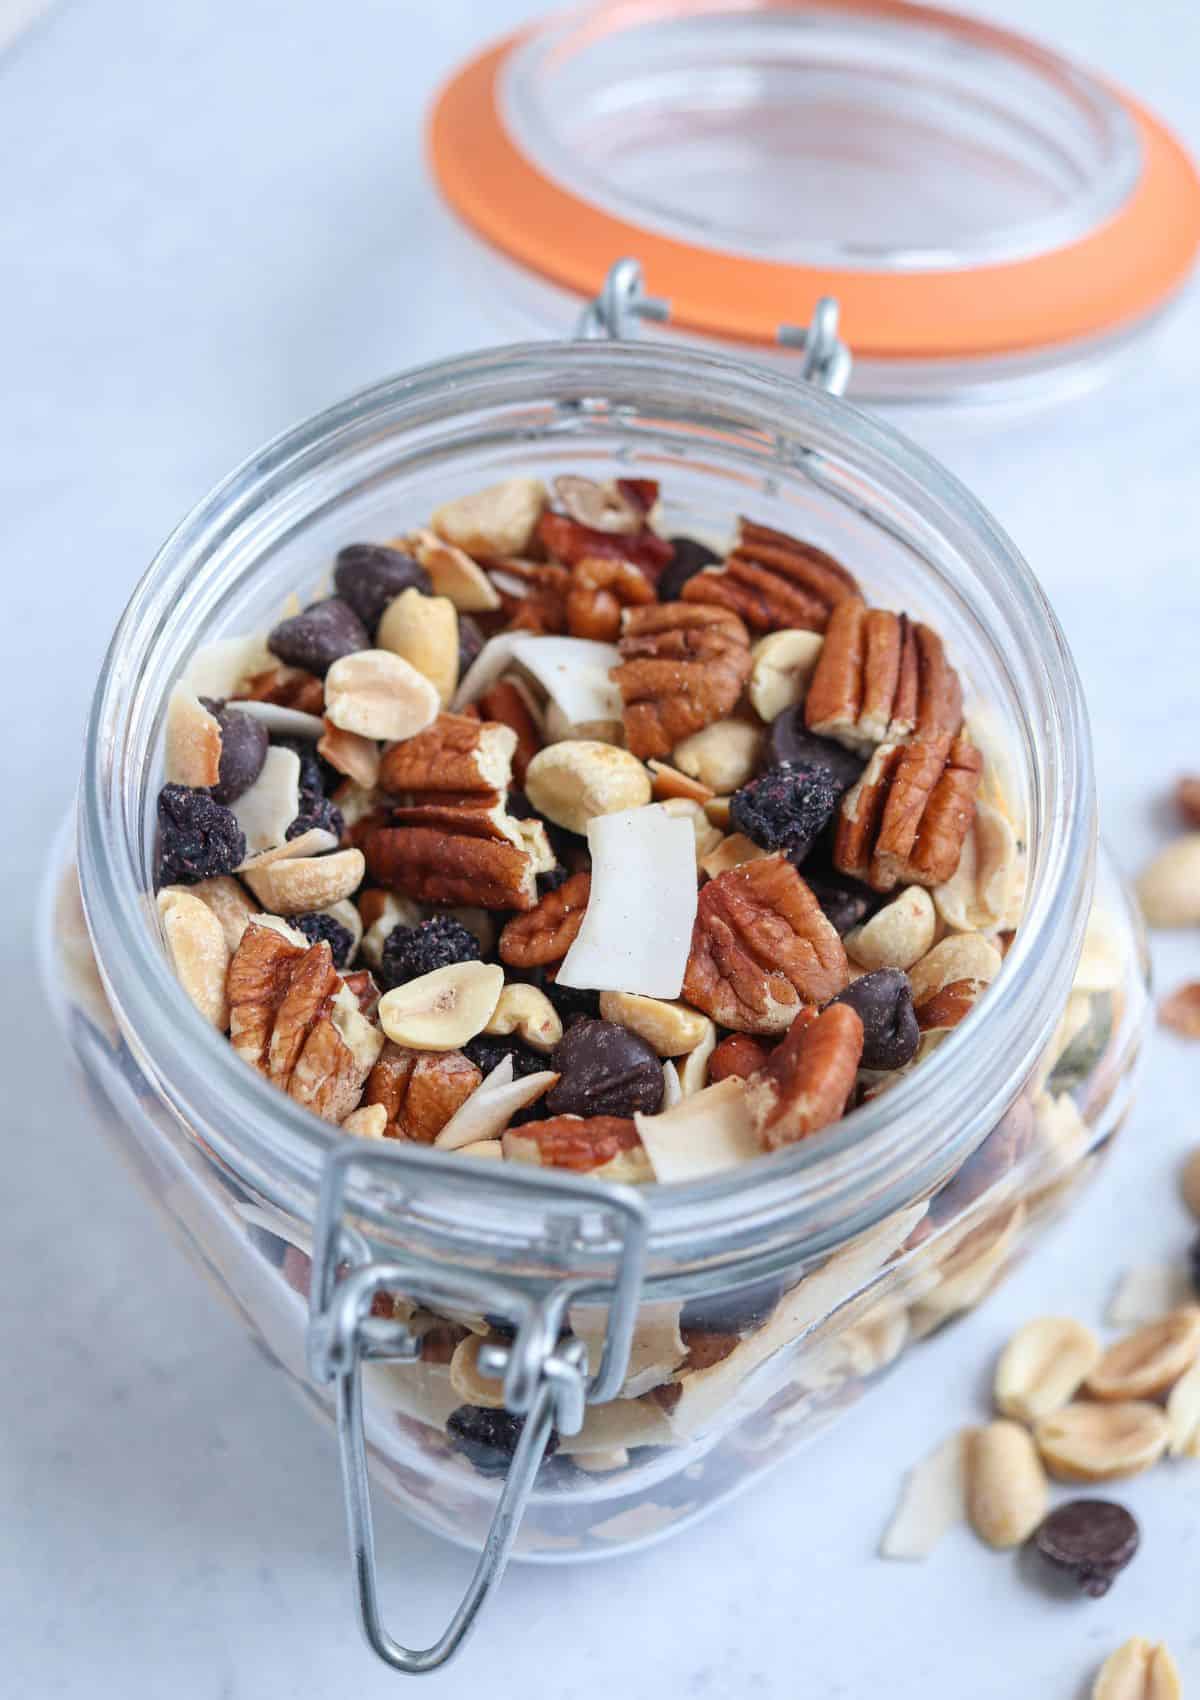 an open jar of low carb trail mix made with nuts, coconut chips, chocolate chips and dried blueberries on a wooden board.